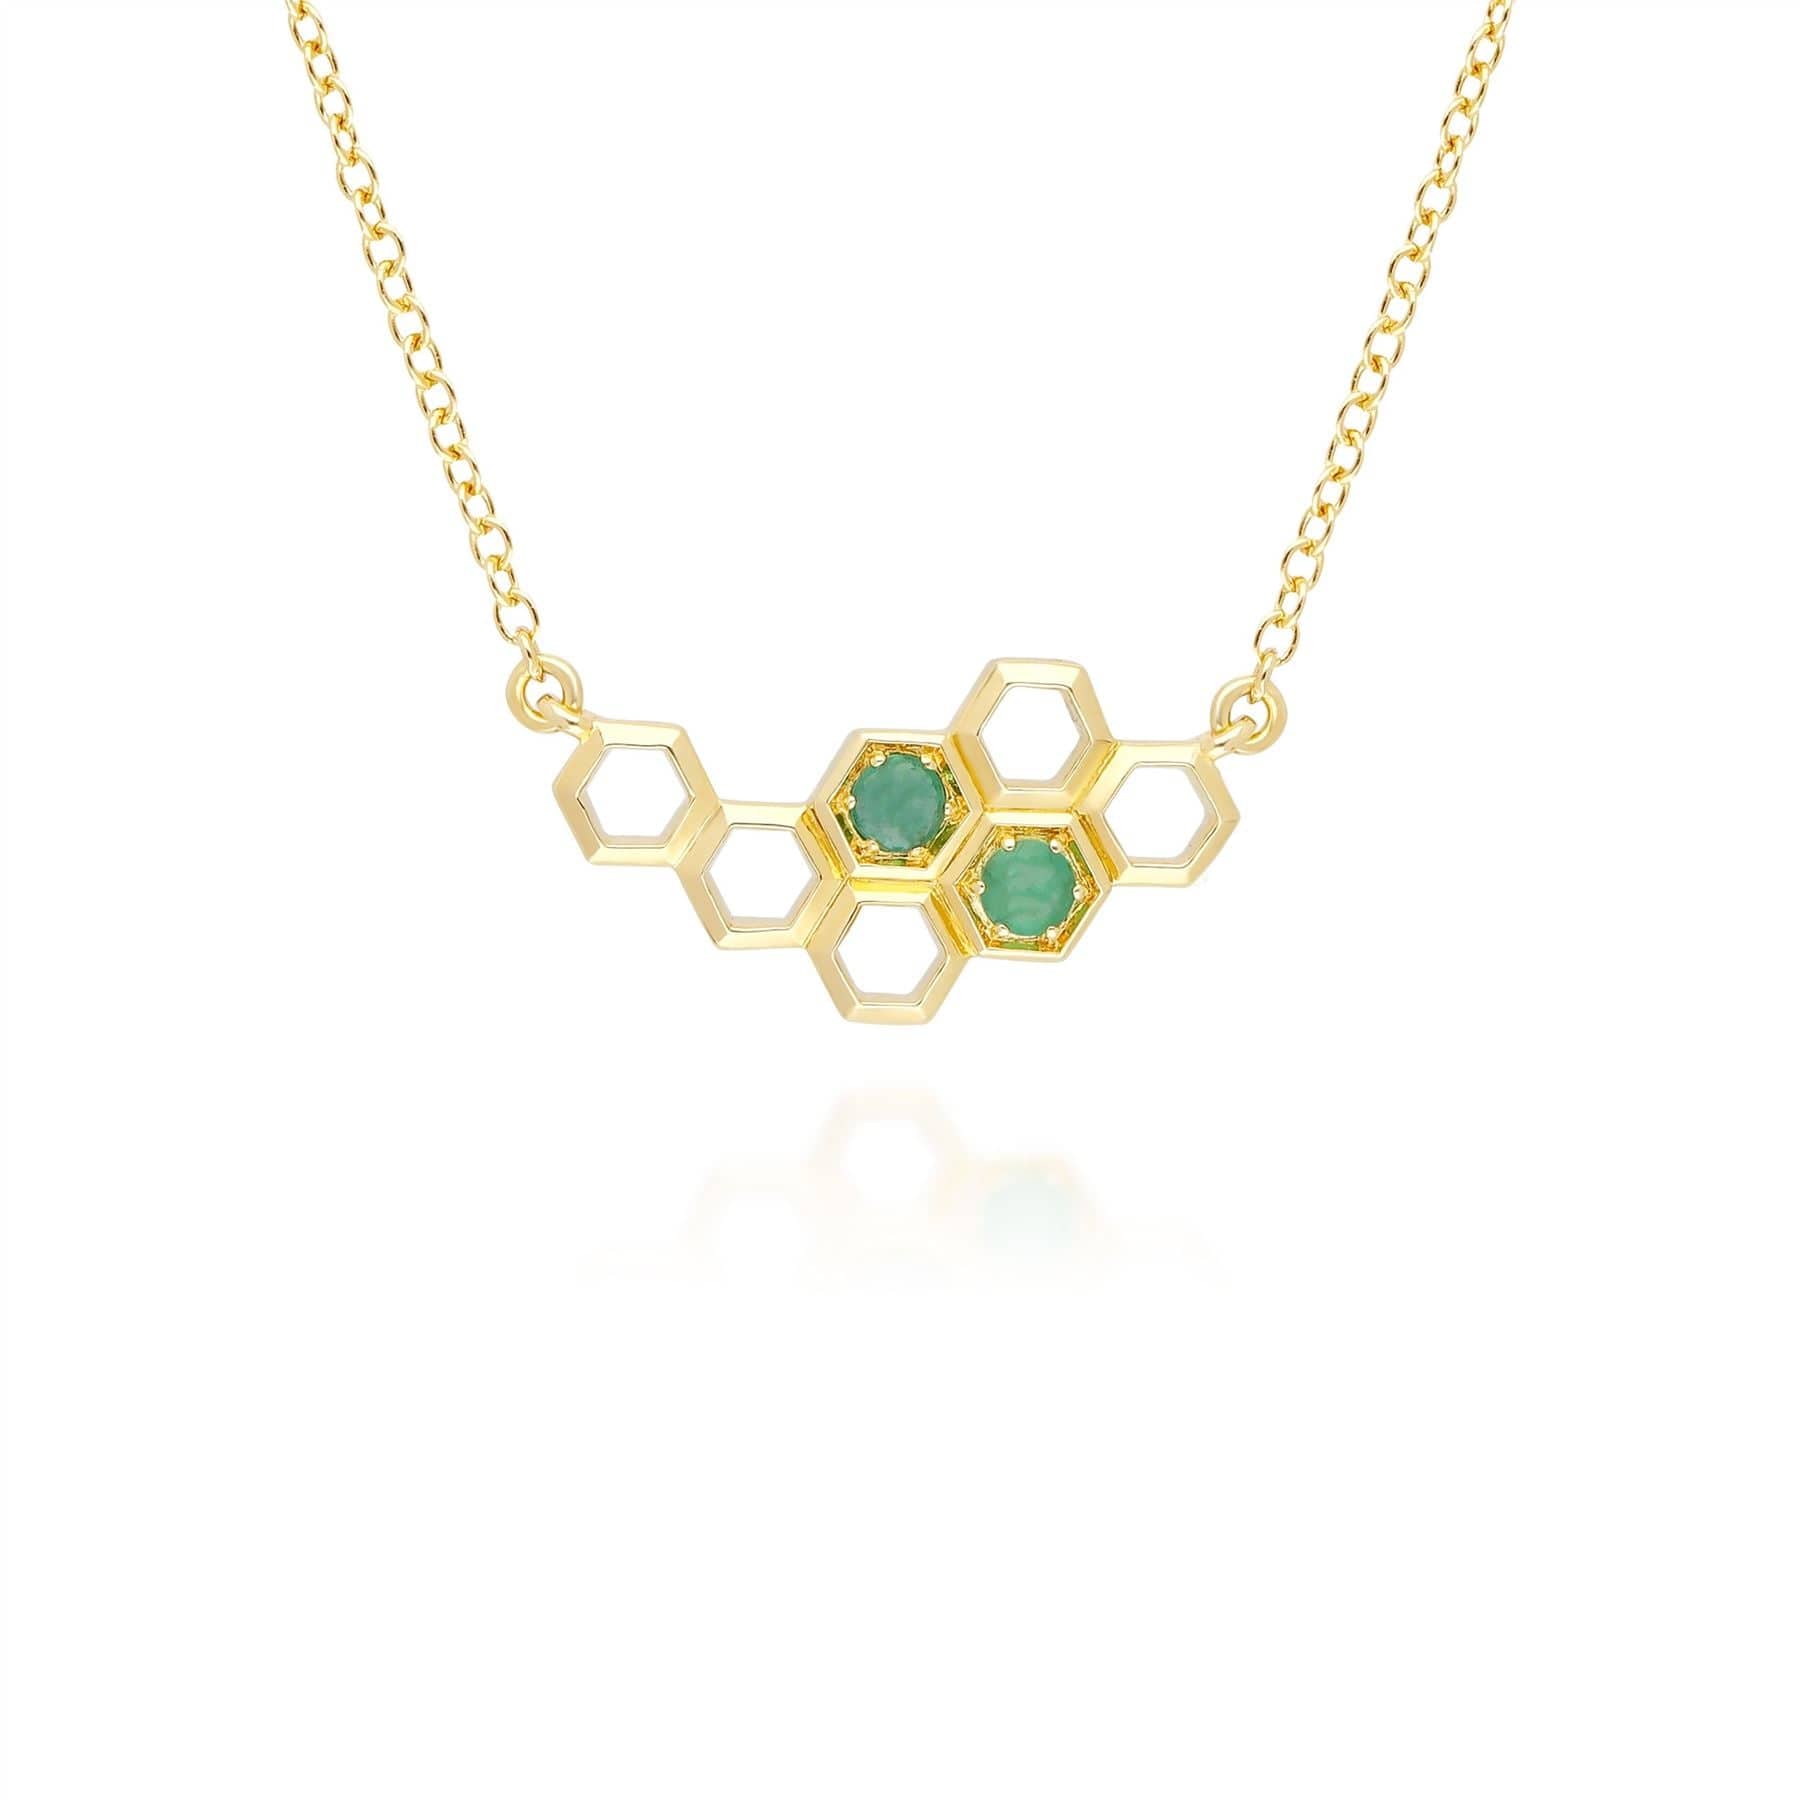 Photos - Pendant / Choker Necklace Honeycomb Inspired Emerald Link Necklace in 9ct Yellow Gold